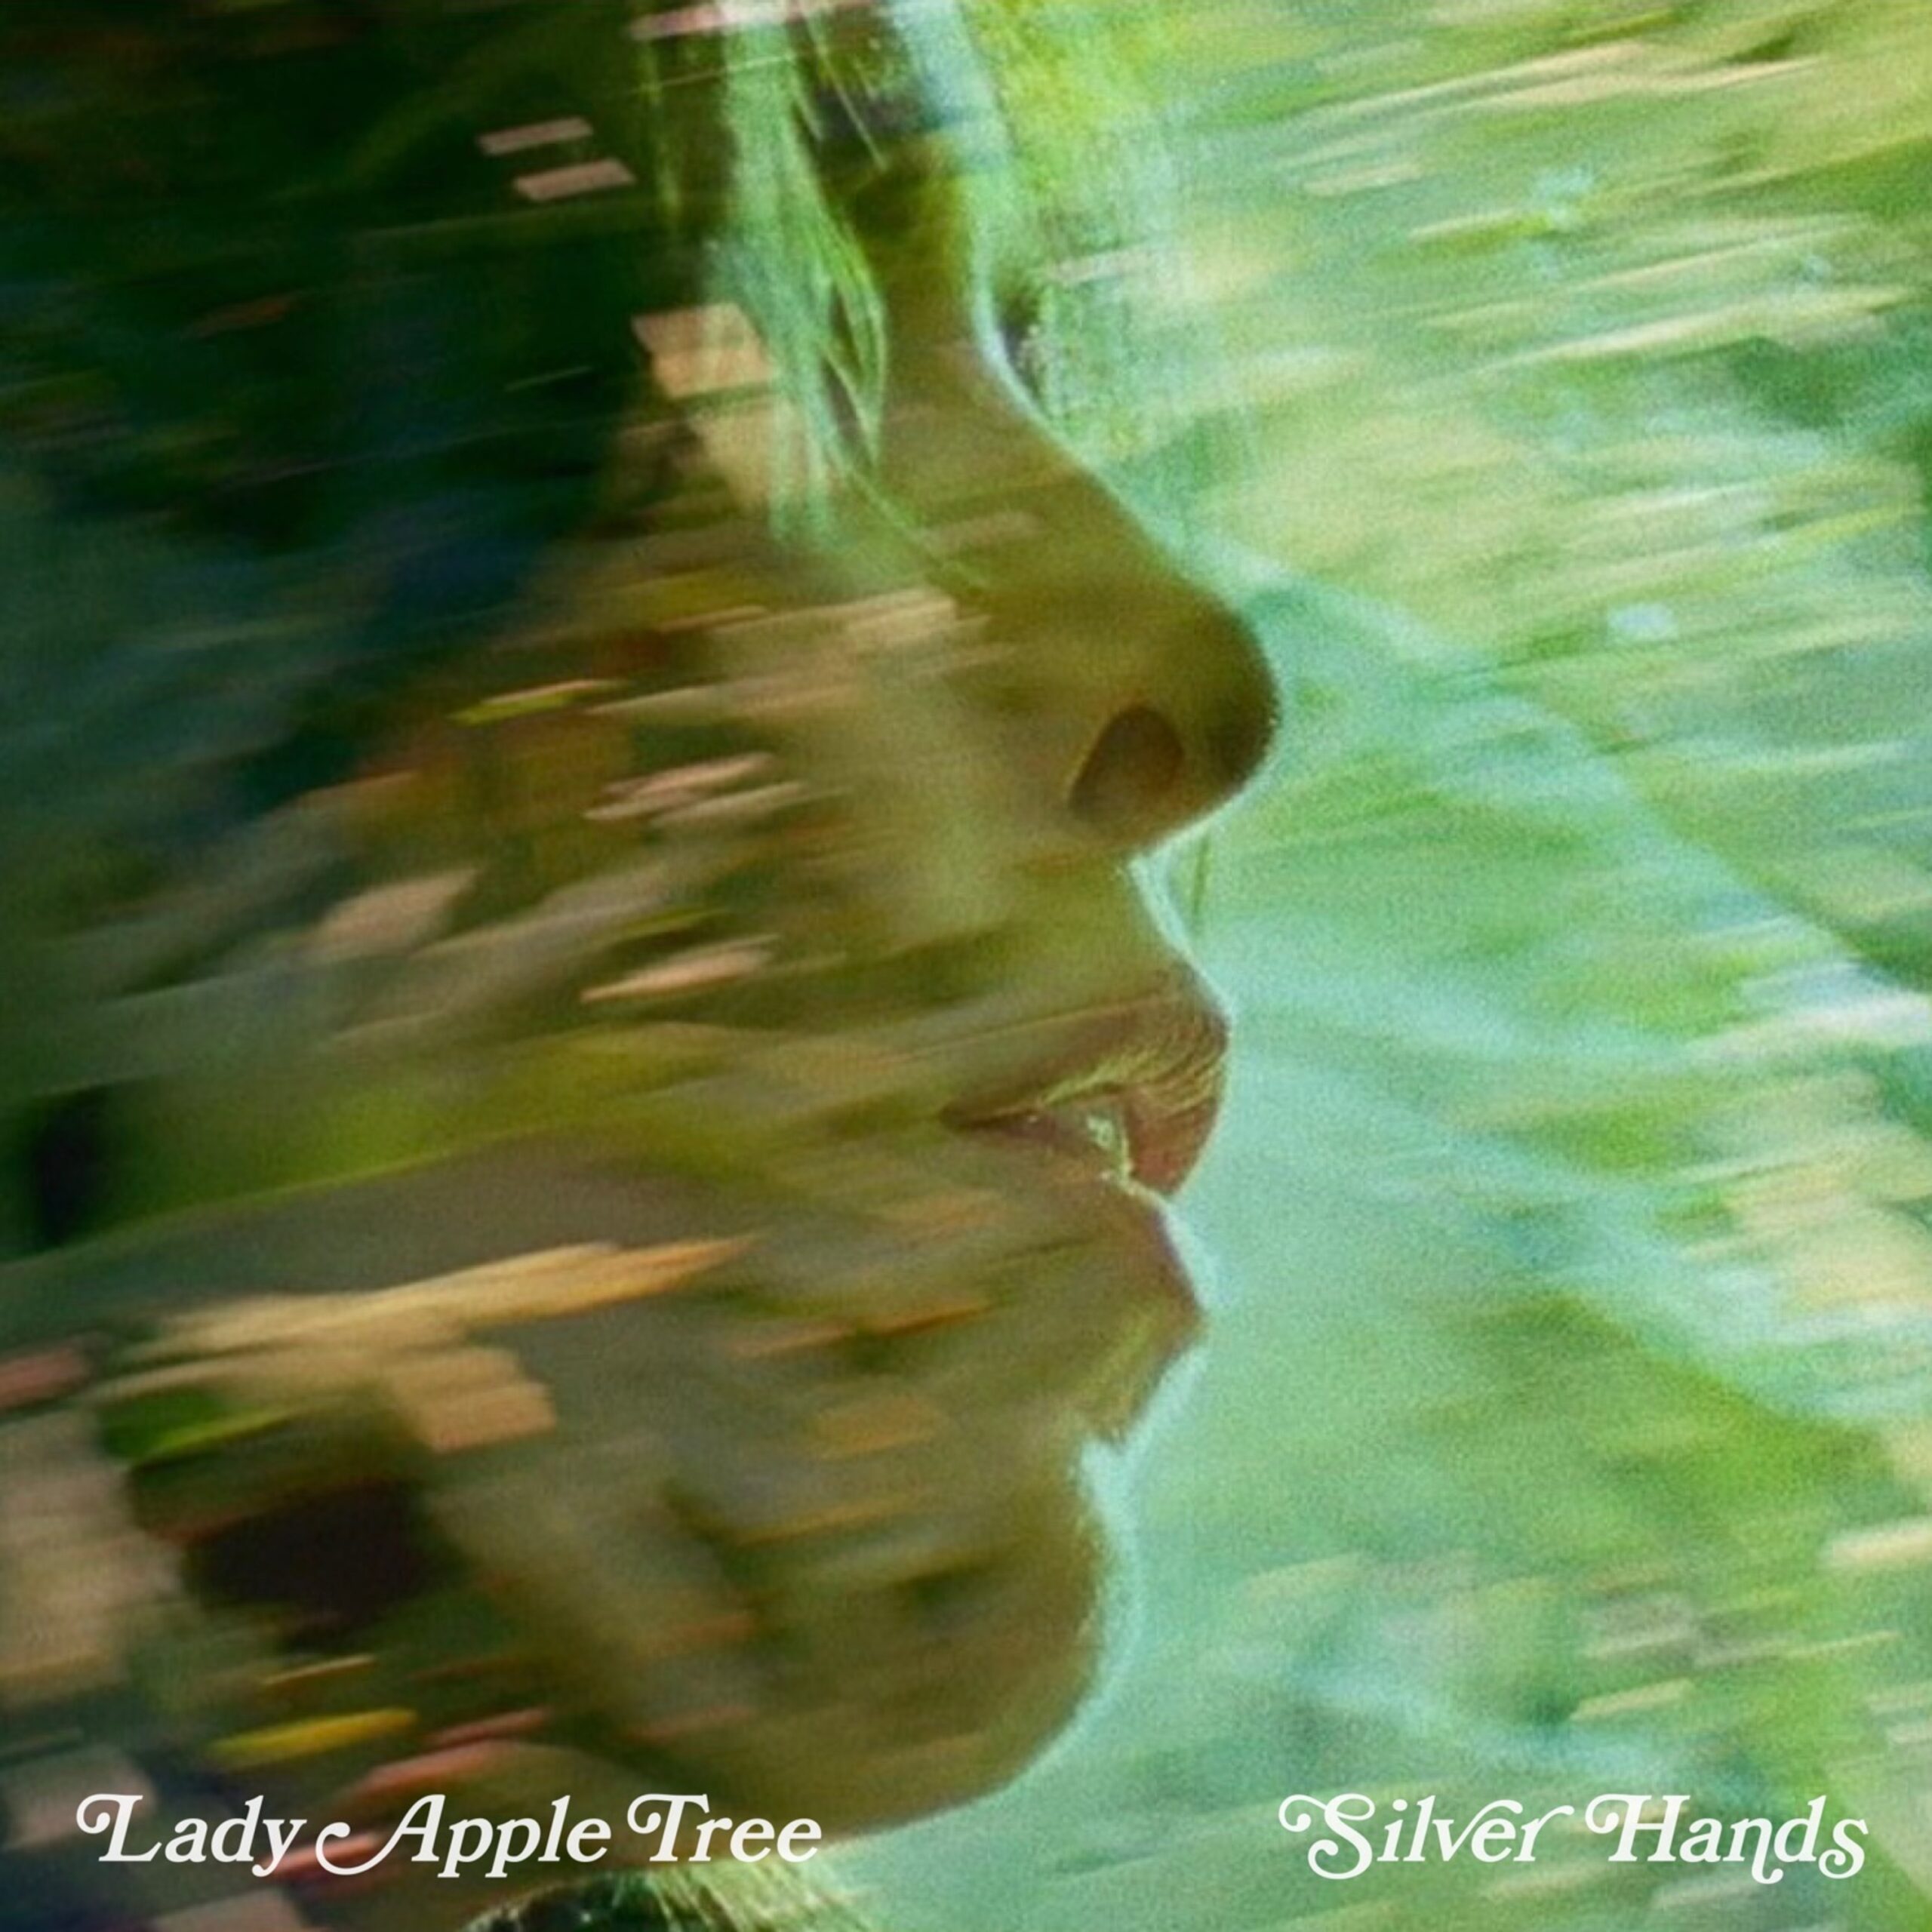 artwork for Silver Hands by Lady Apple Tree